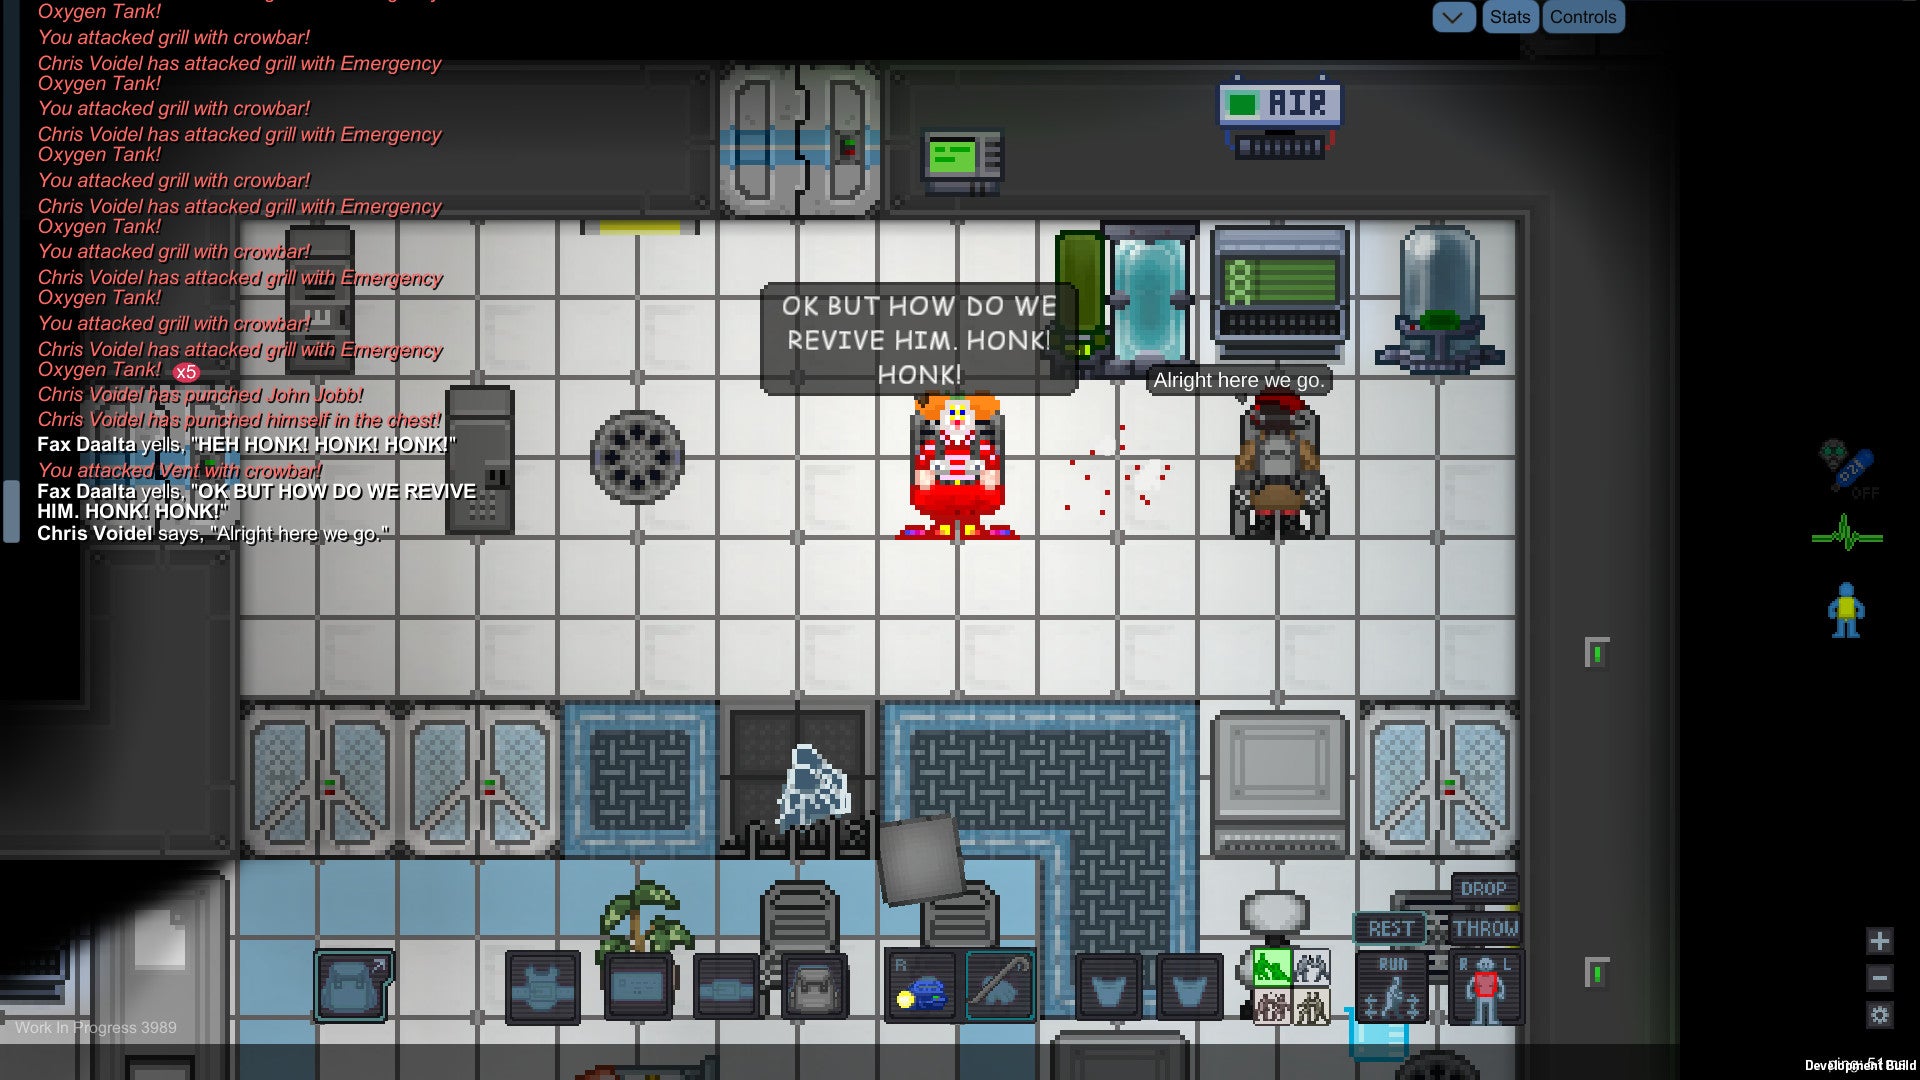 A screenshot of Unitystation showing a 2D, topdown view of the inside of a spaceship. At the centre of the image stands a clown, who is saying, "OK BUT HOW DO WE REVIVE HIM. HONK! HONK!"